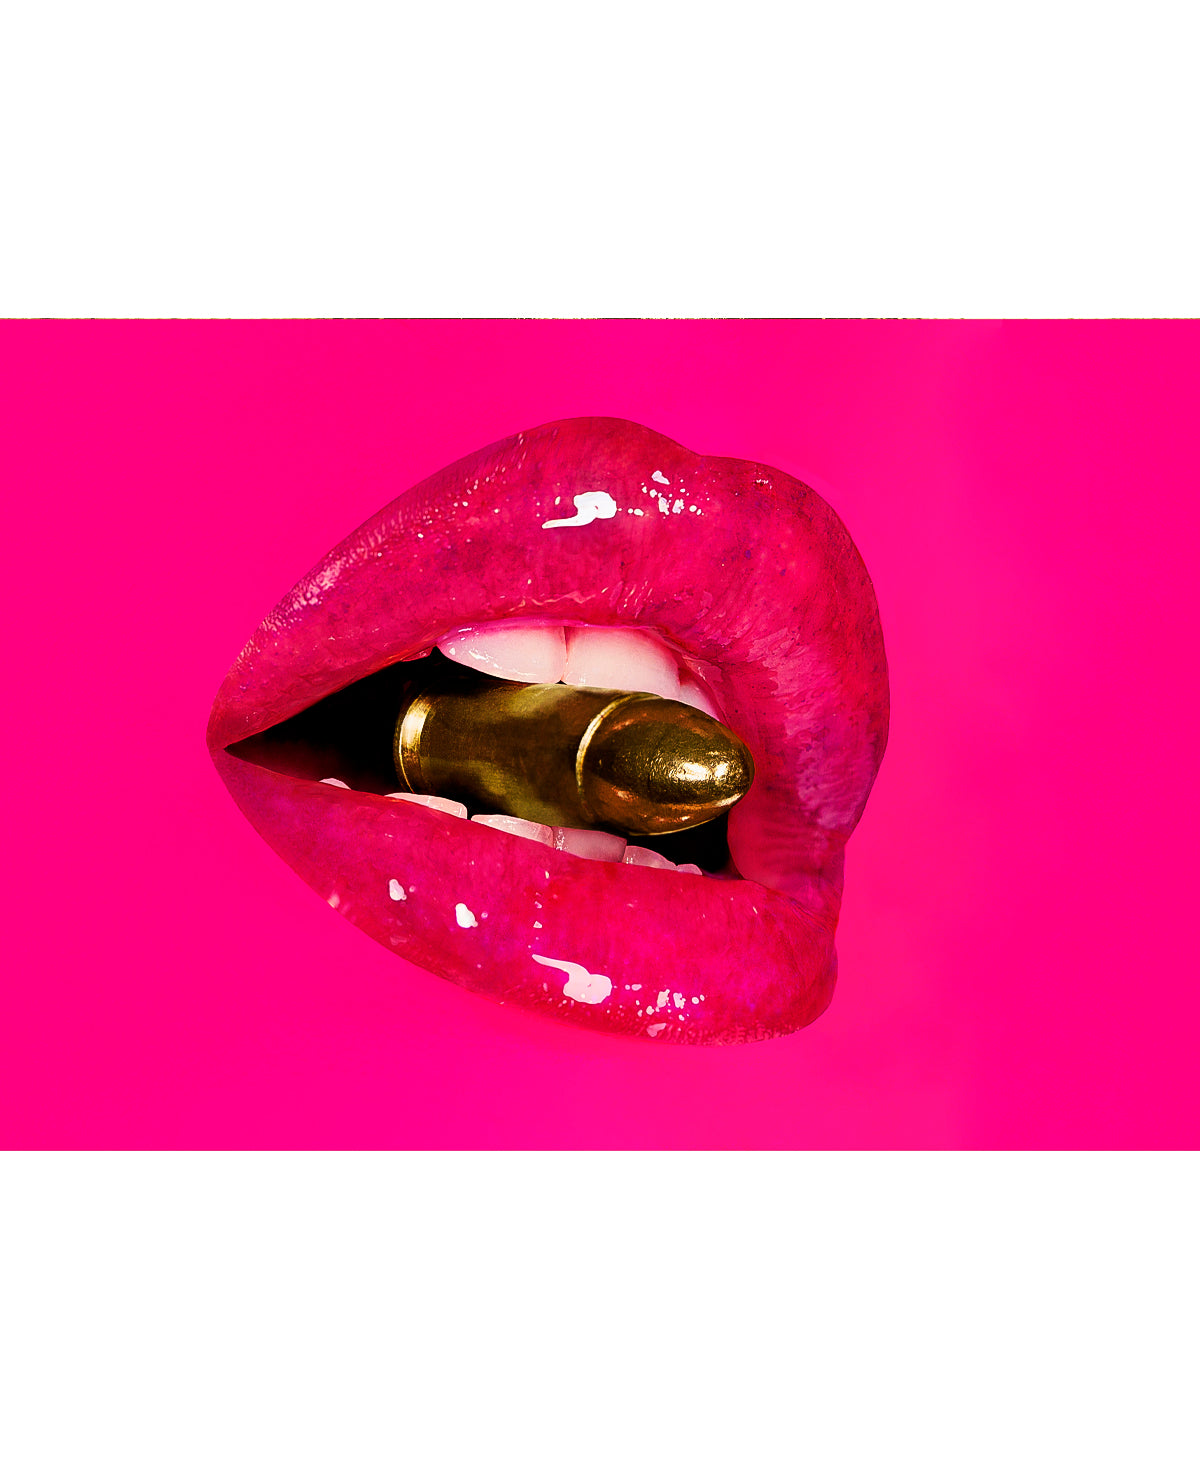 BULLETPROOF (PINK) / POP ART / Limited Editions from €200,- Worldwide shipping 